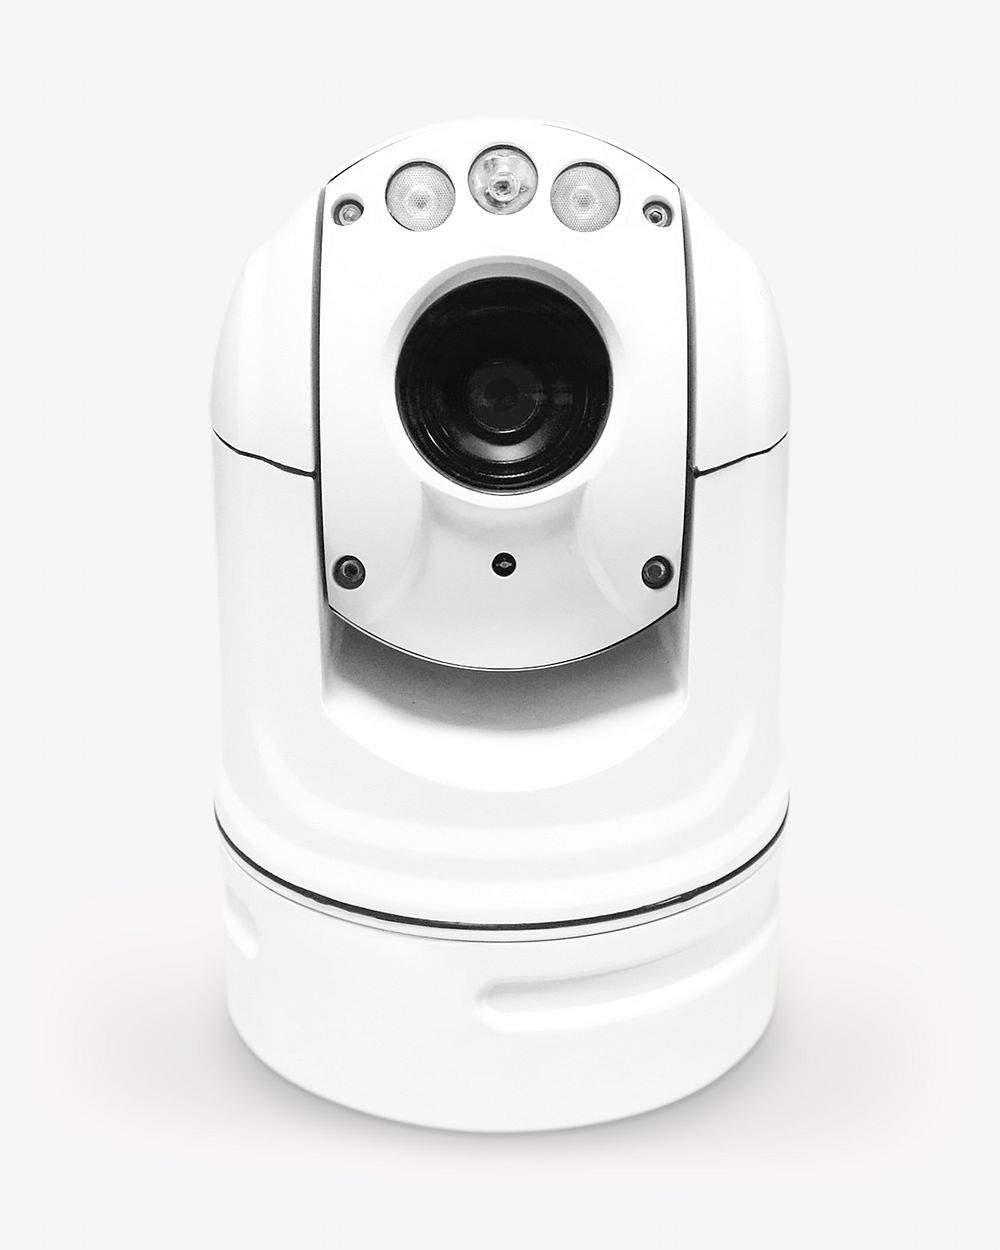 Security camera, isolated object on white